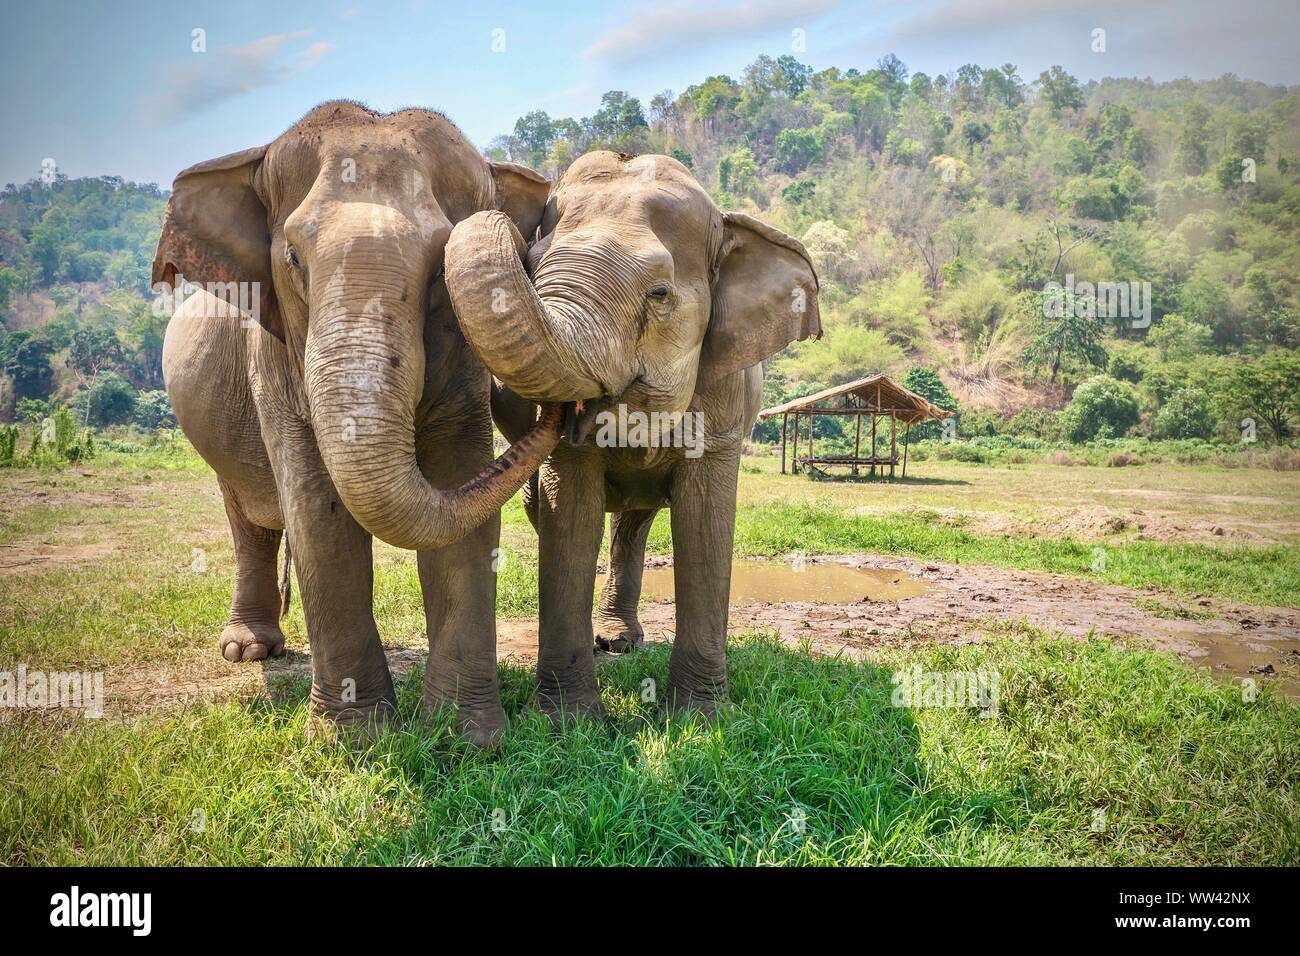 Affectionate animal behavior as two adult female Asian elephants touch each other with their trunks and faces. Rural northern Thailand. Stock Photo